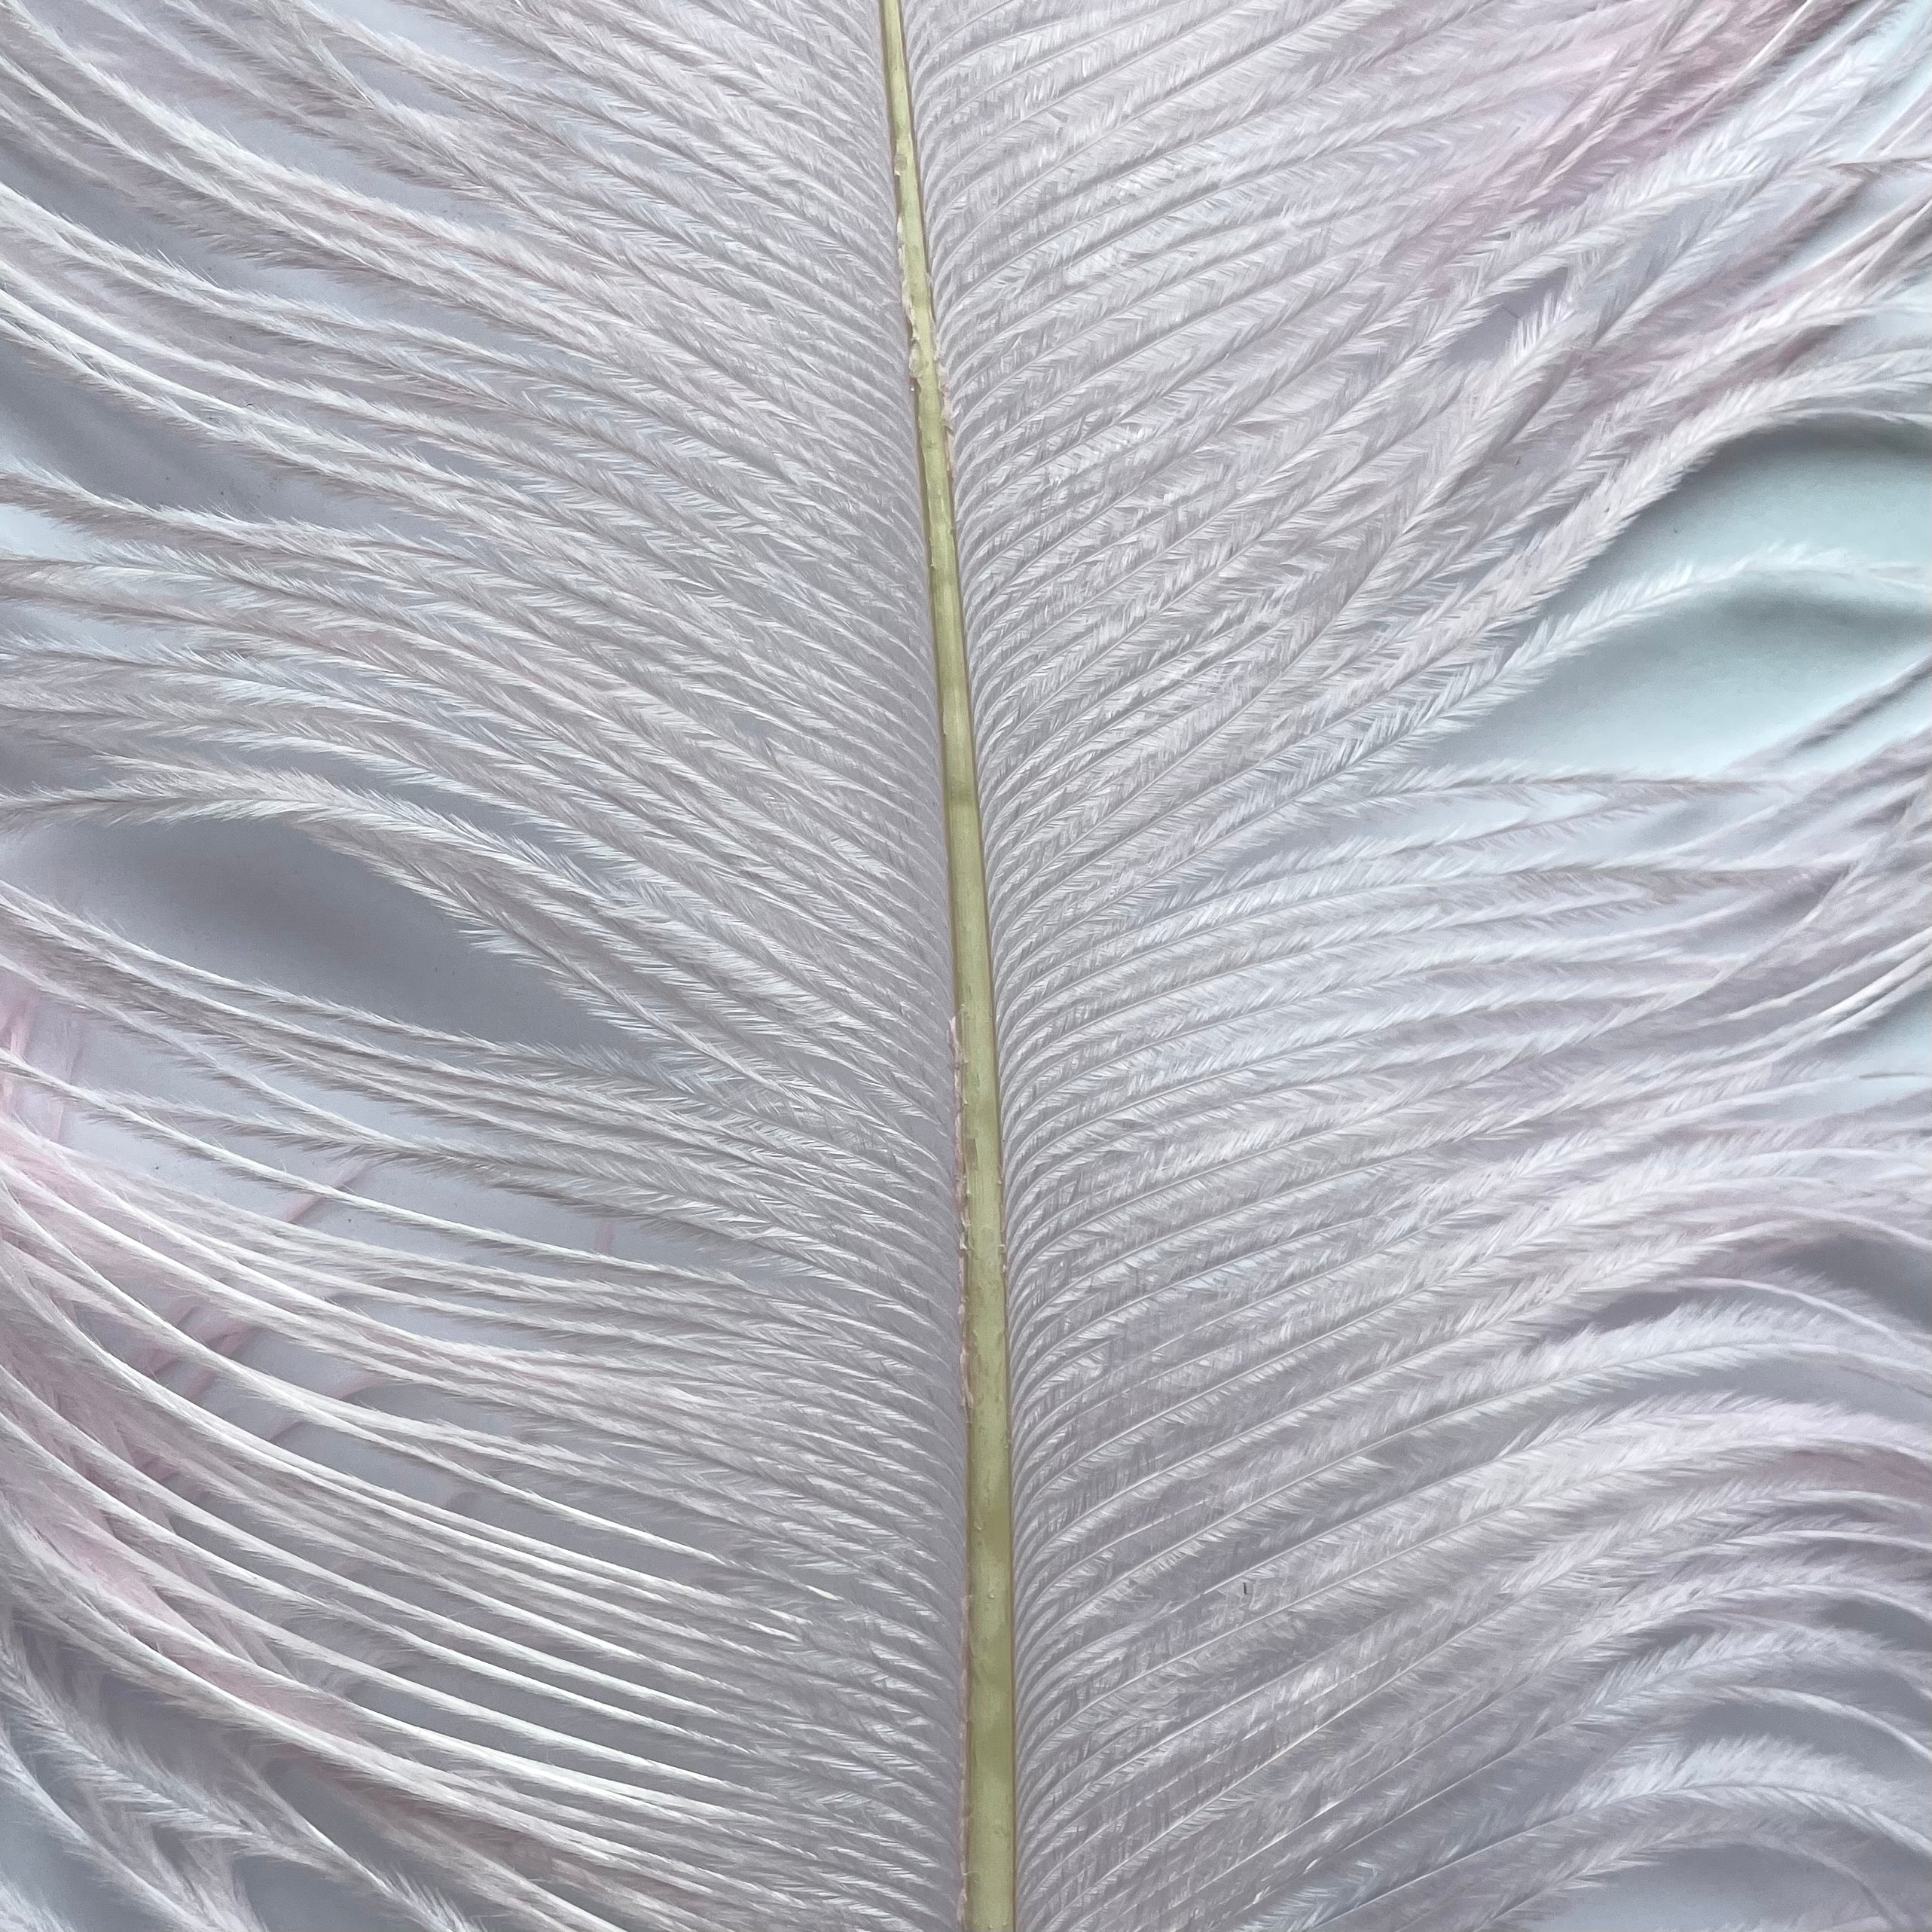 Ostrich Wing Feather Plumes 60-65cm (24-26") - Light Pink